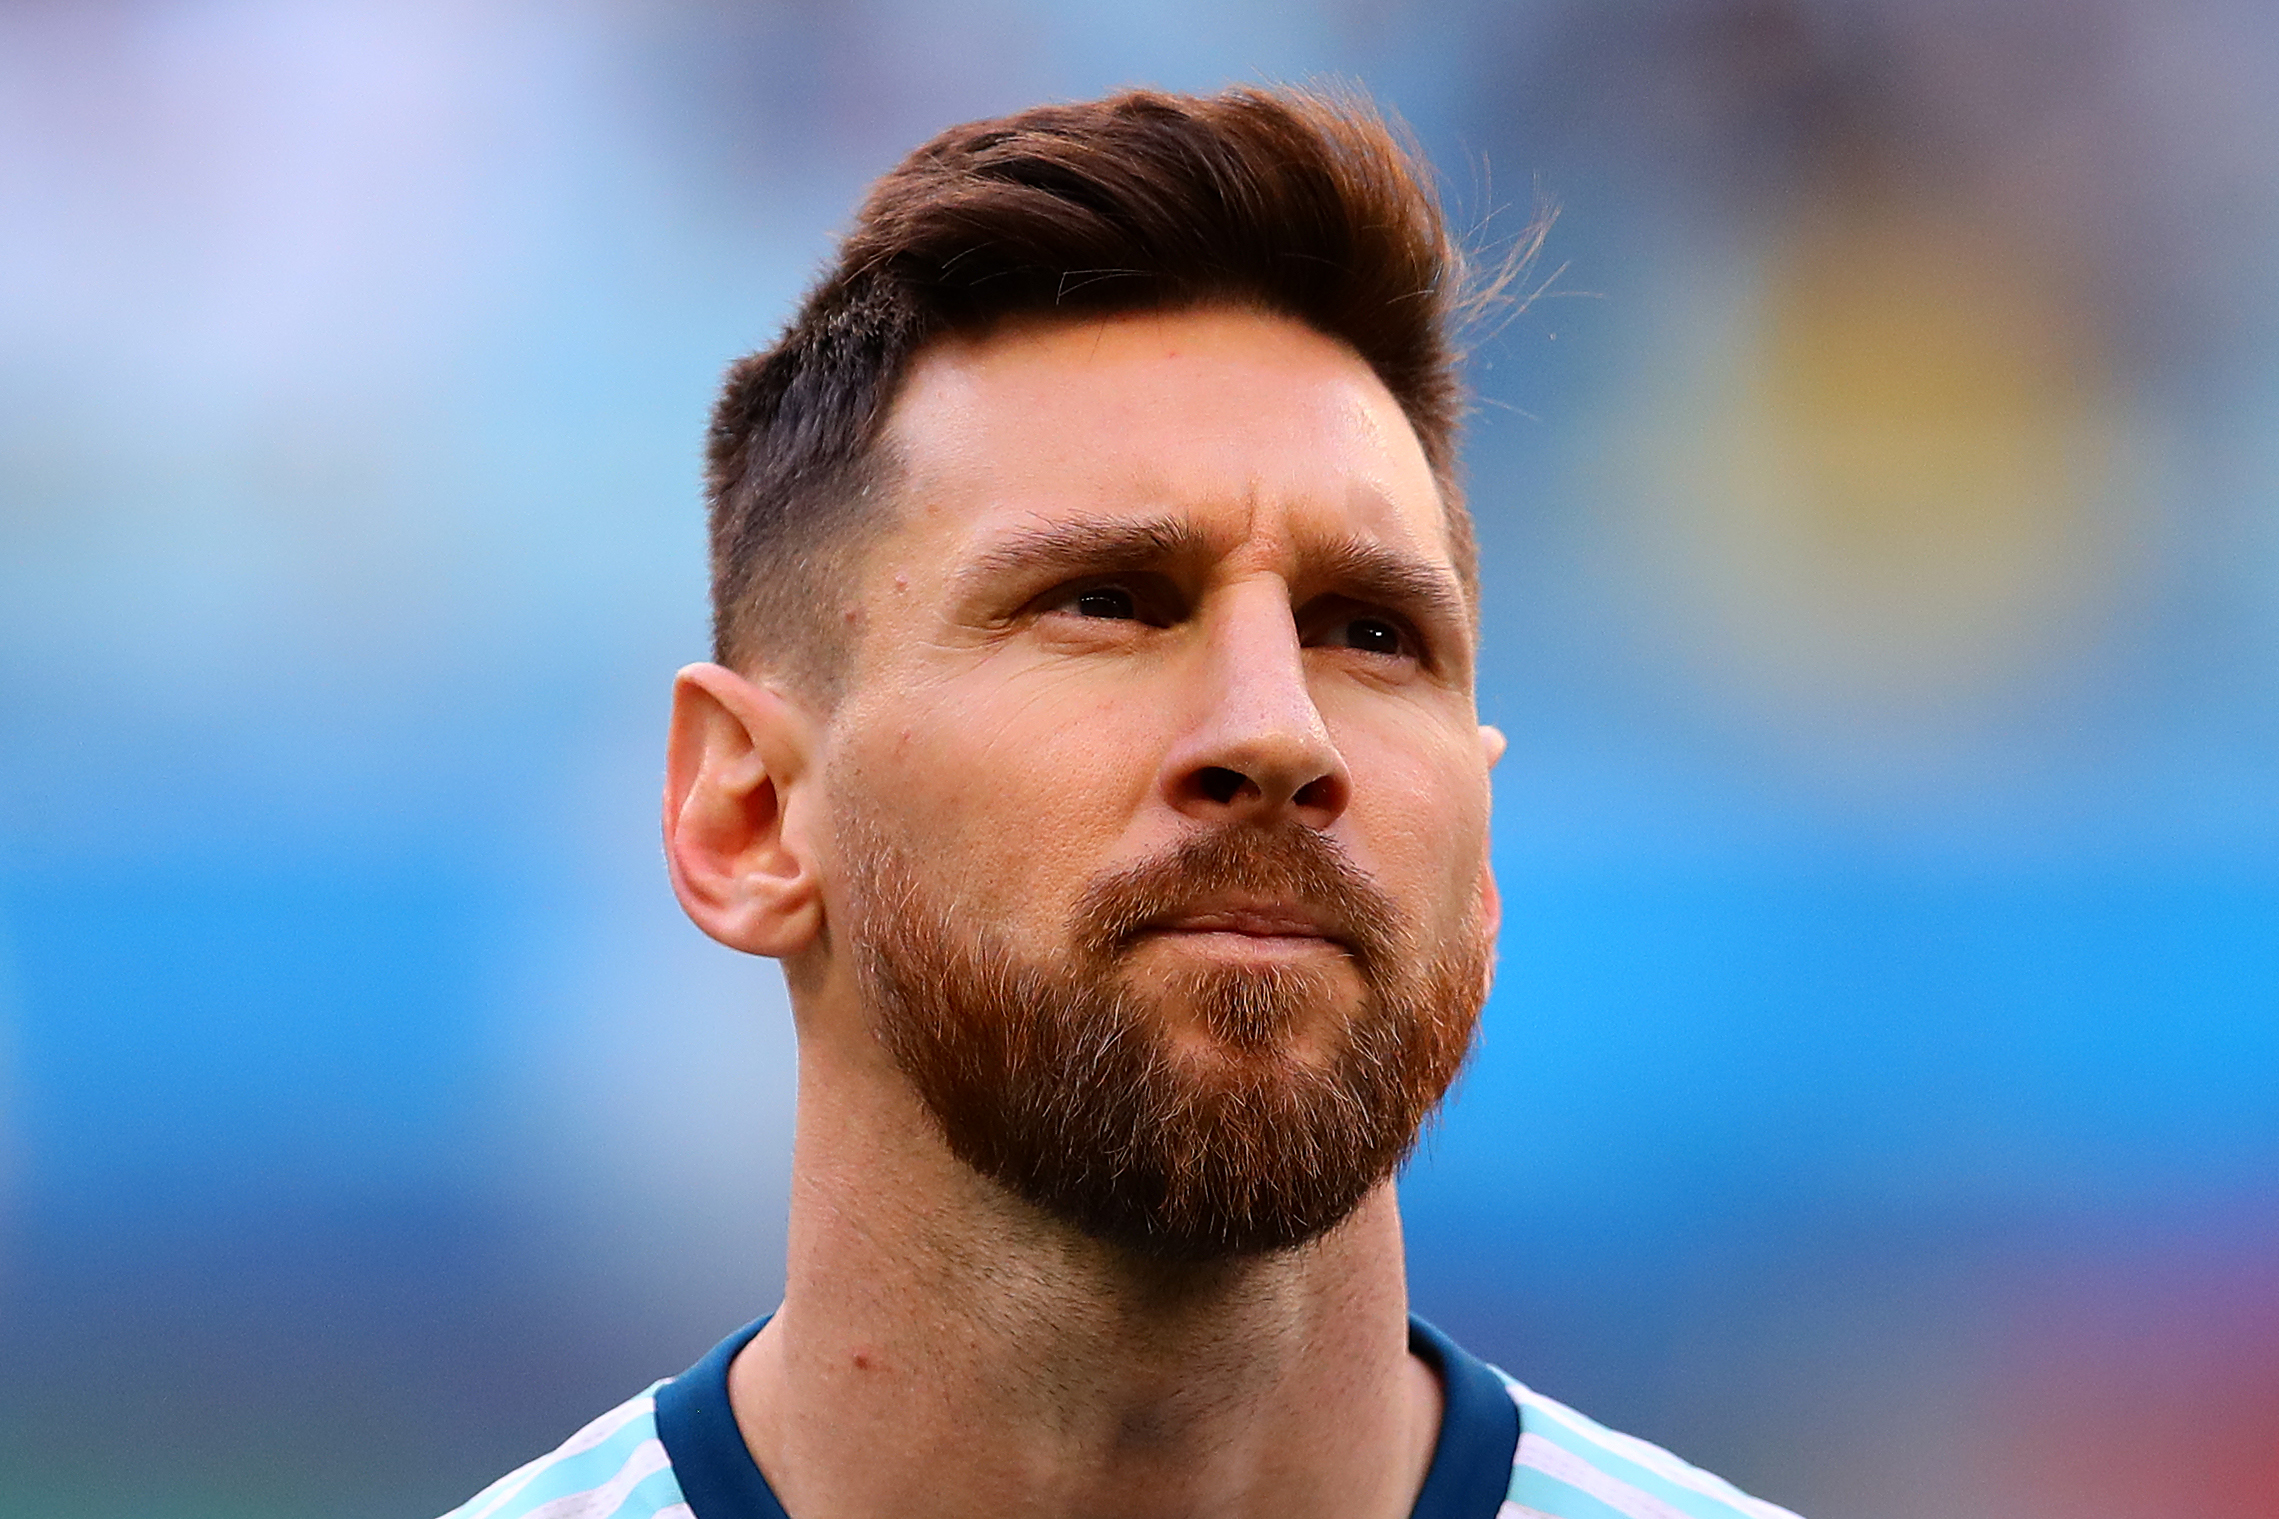 Man Who Looks EXACTLY Like Lionel Messi Denies Accusations That He Pretended To Be Him To Have Sex With 23 Women